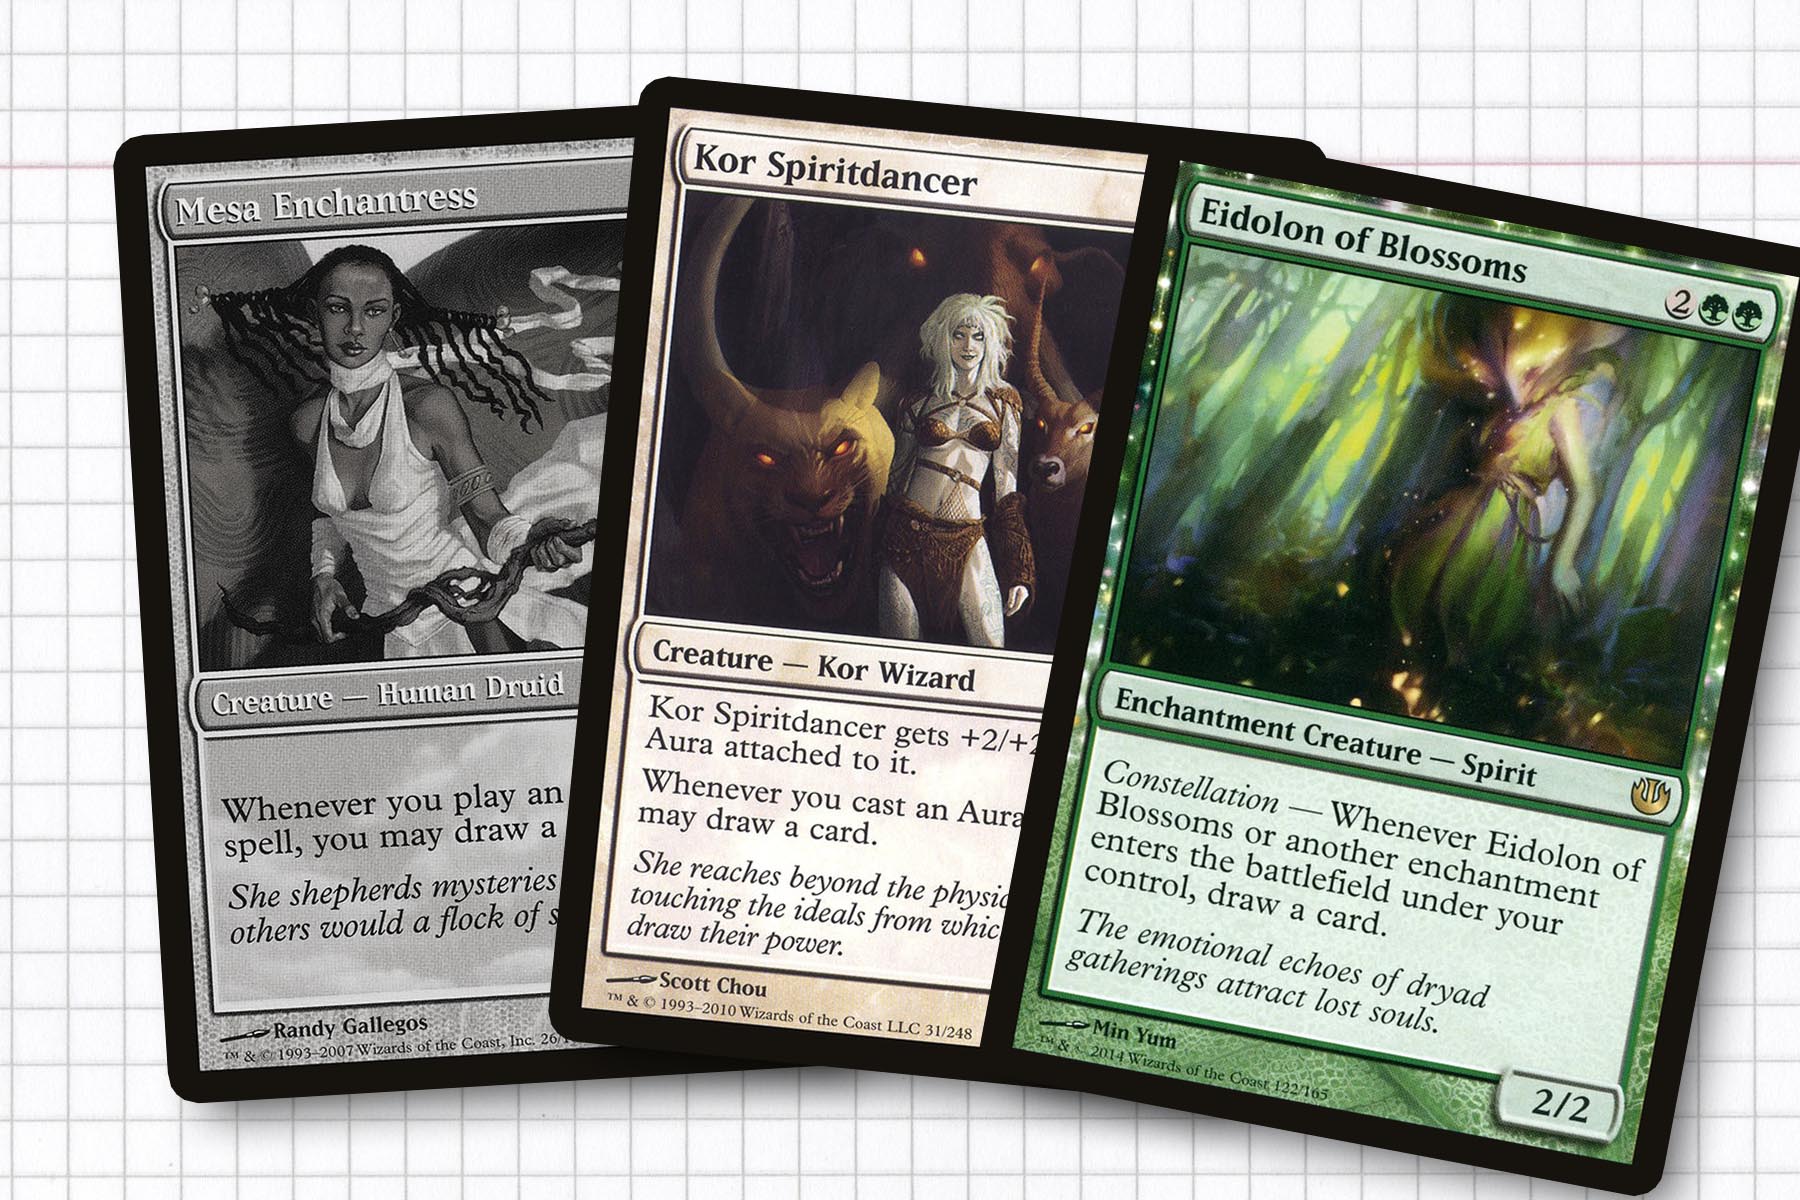 Three staple enchantress cards, Mesa Enchantress devoid of color, as it is no longer a staple to this deck.